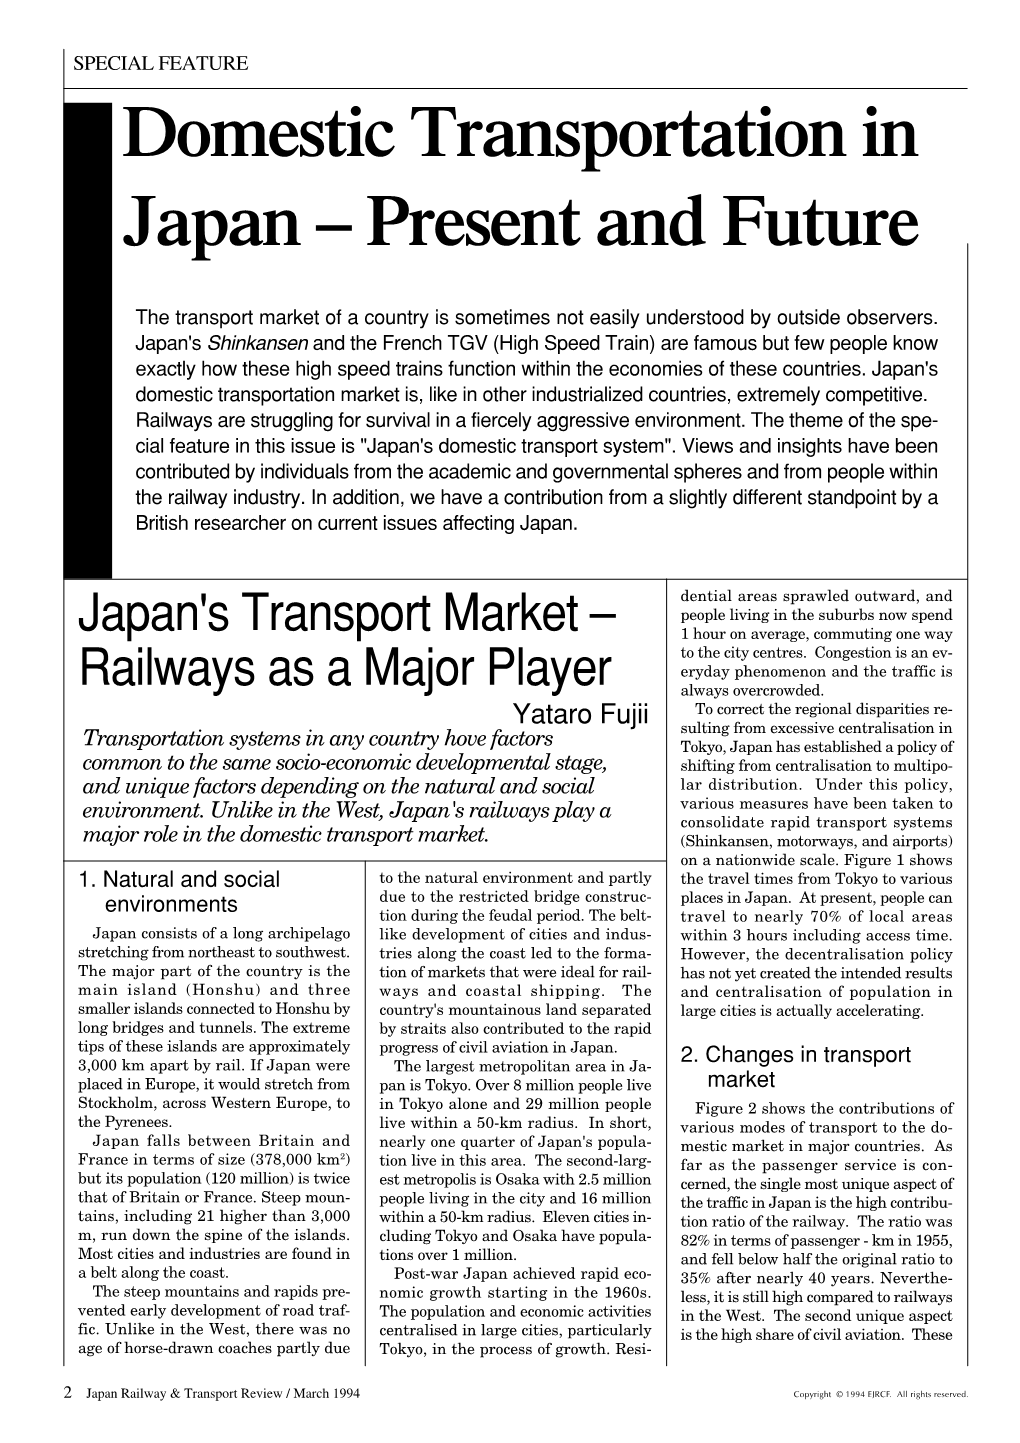 Domestic Transportation in Japan – Present and Future